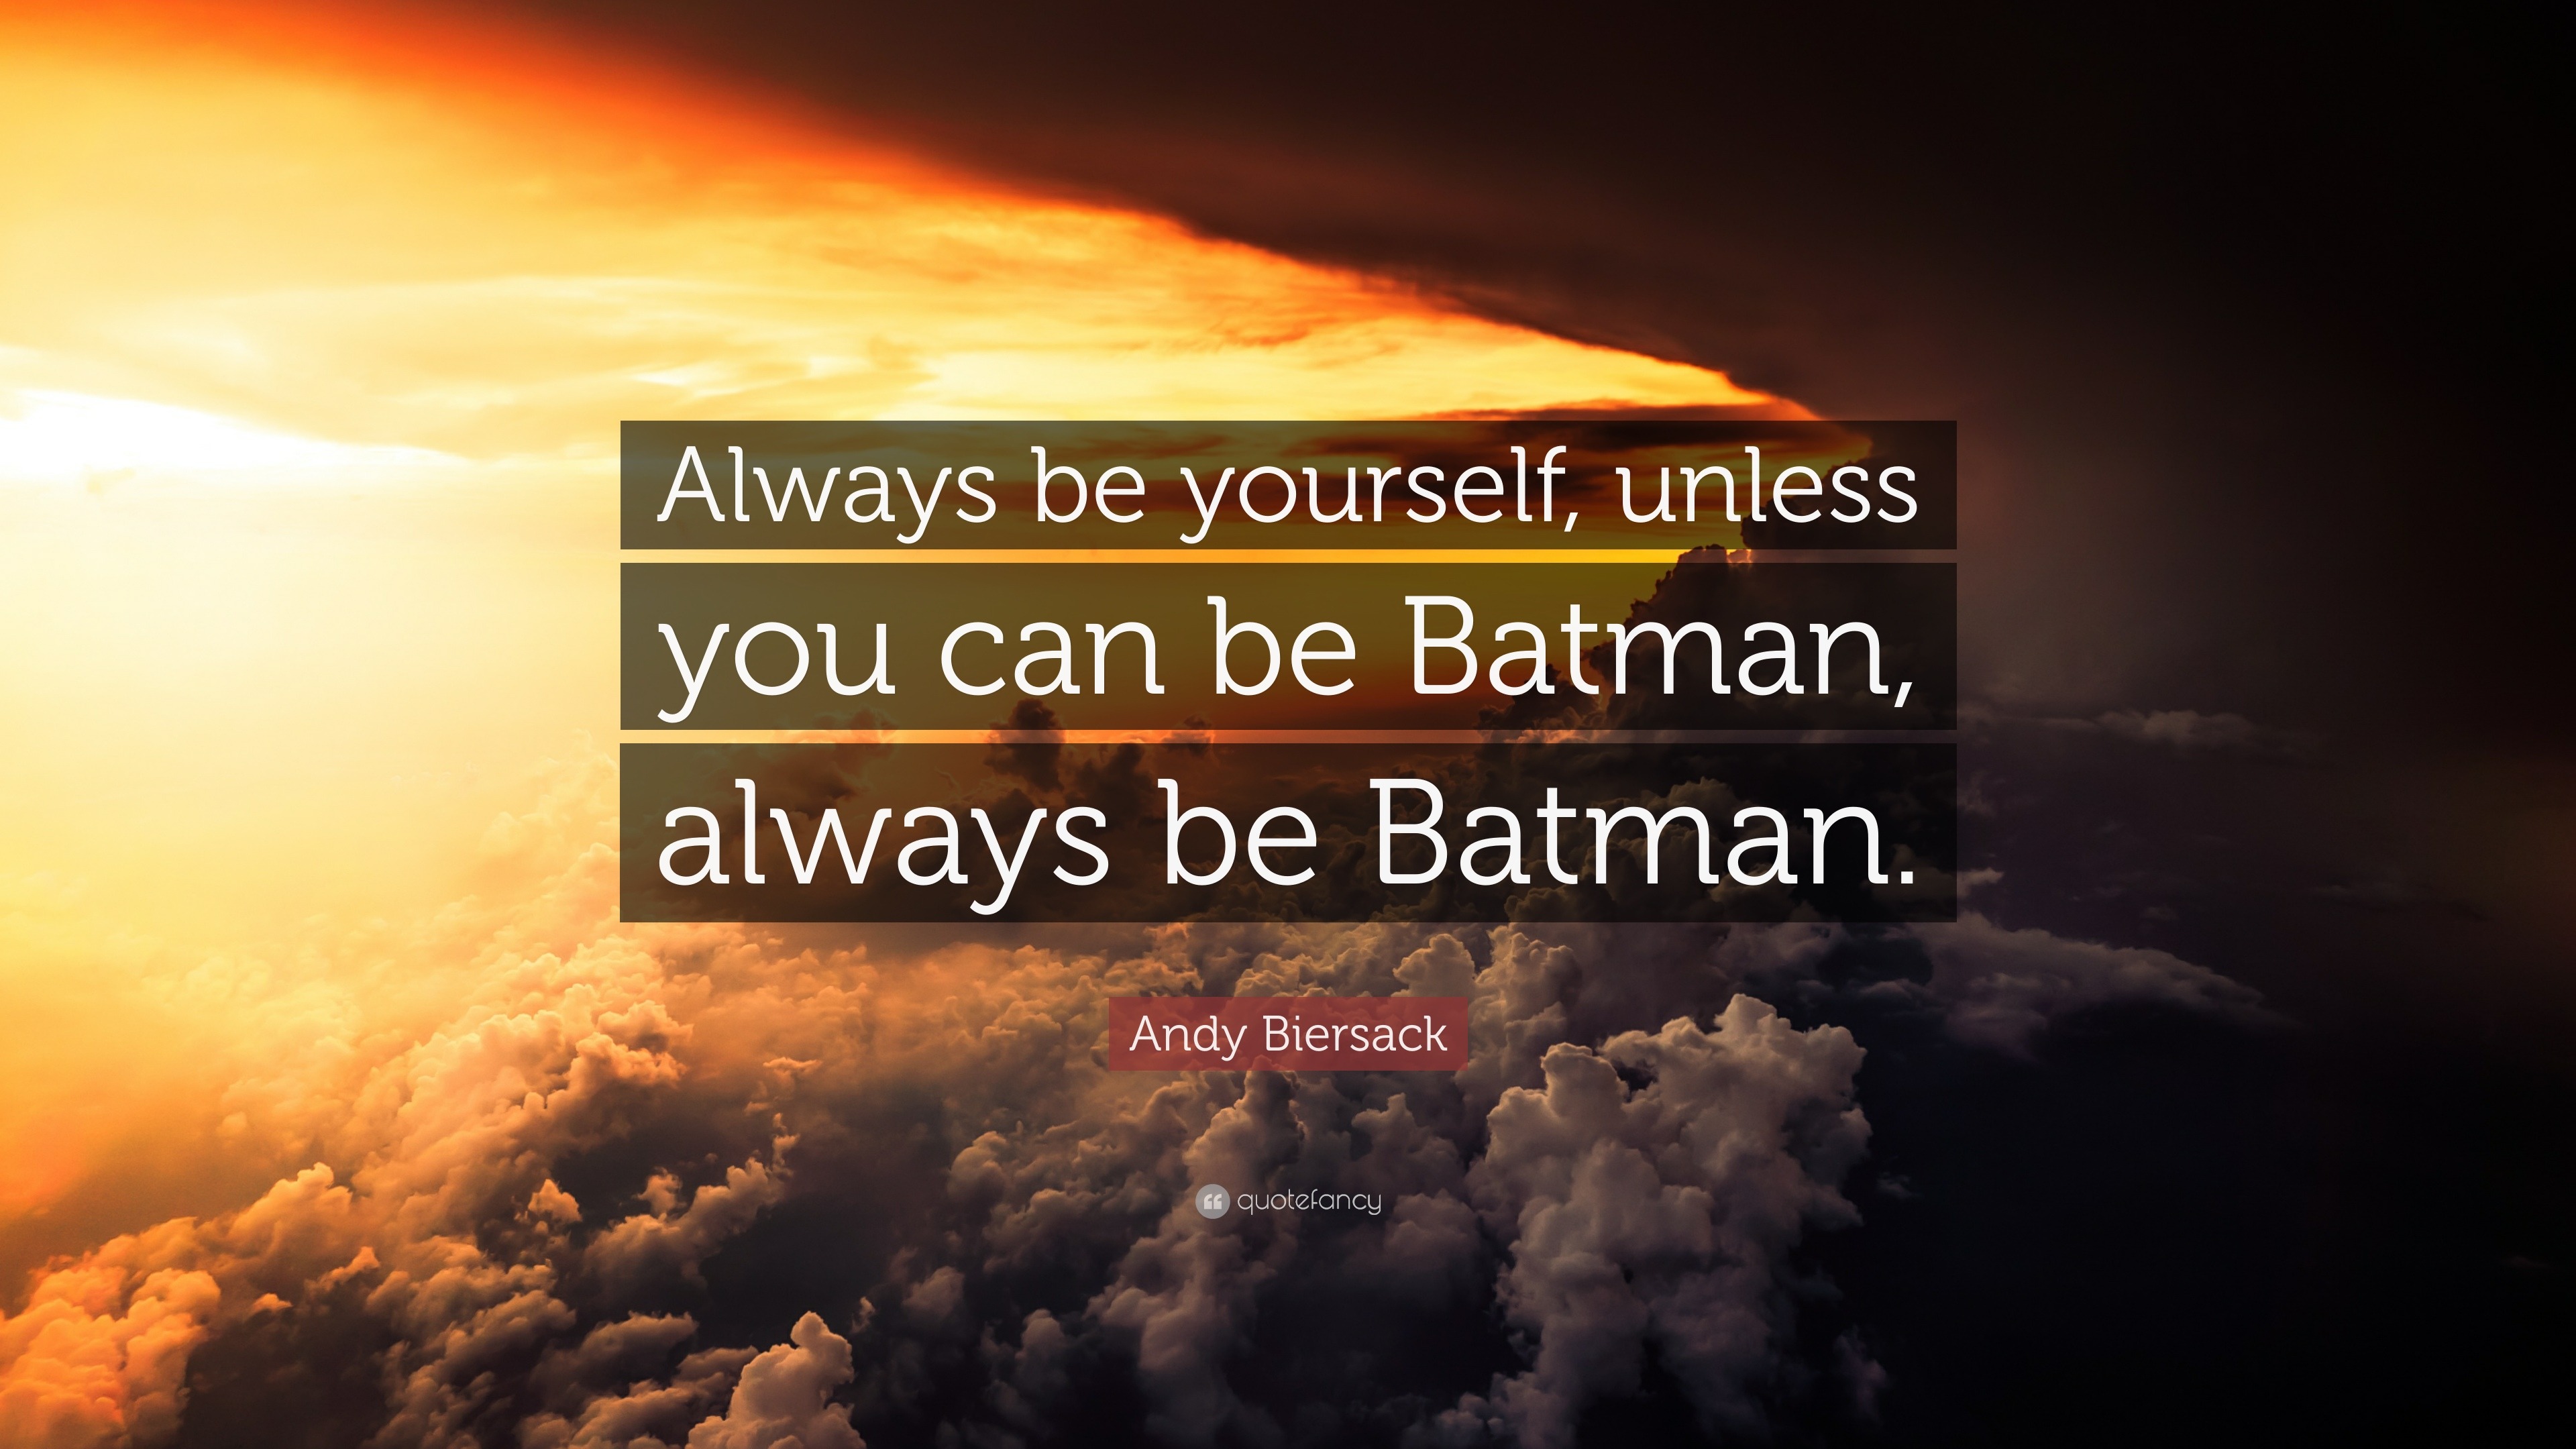 Andy Biersack Quote: “Always be yourself, unless you can be Batman